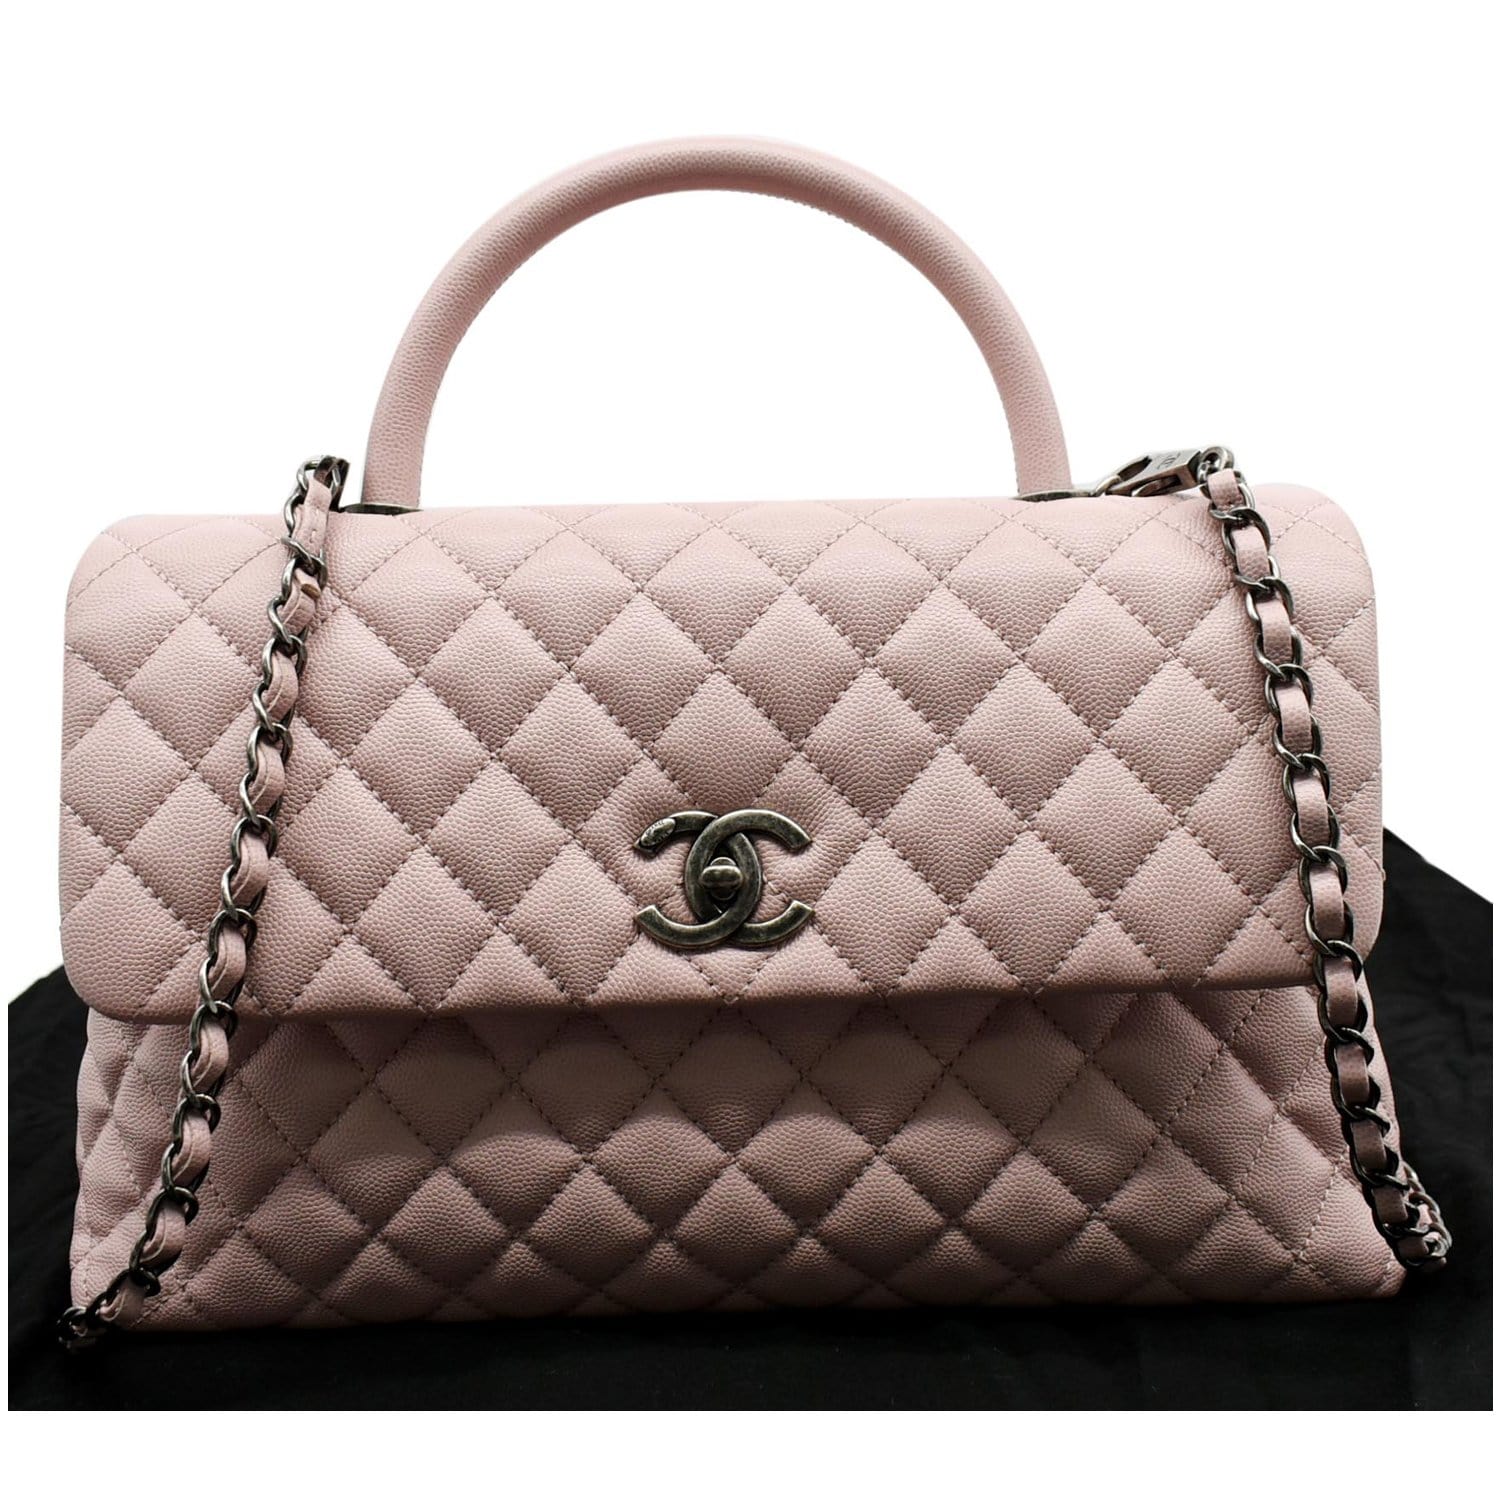 coco chanel pink